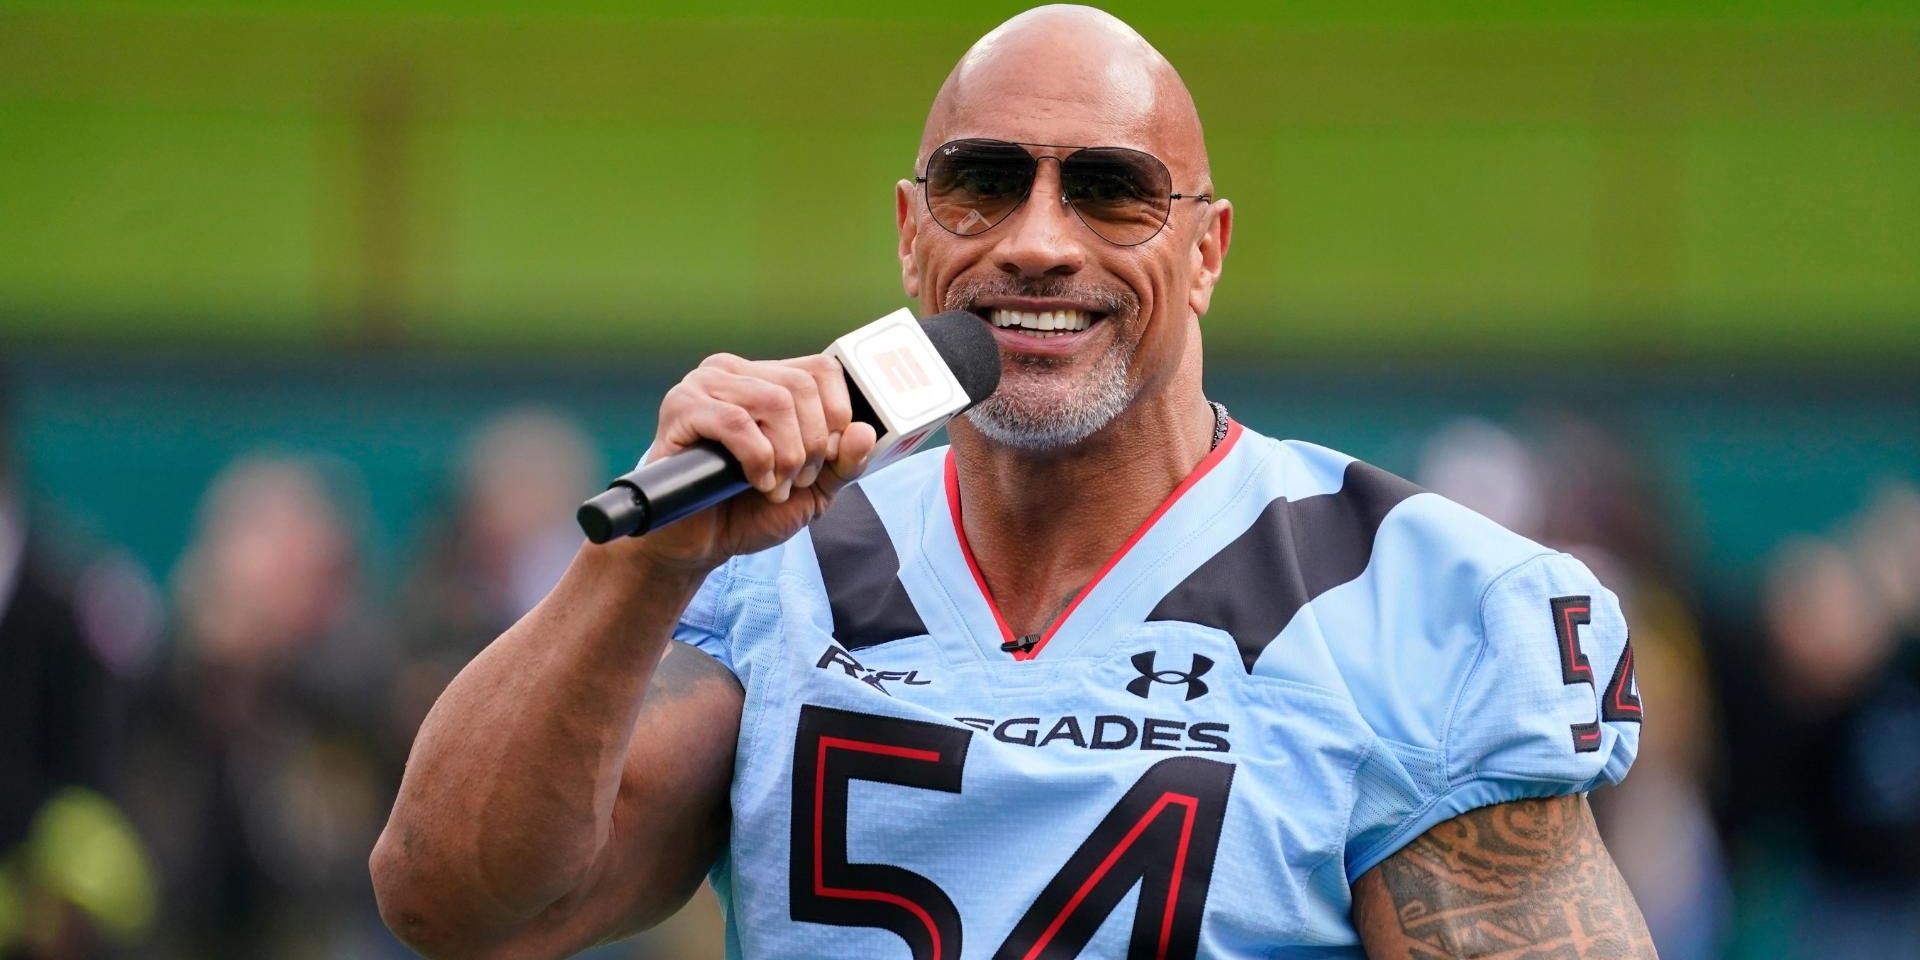 The Rock makes a speech at the XFL 